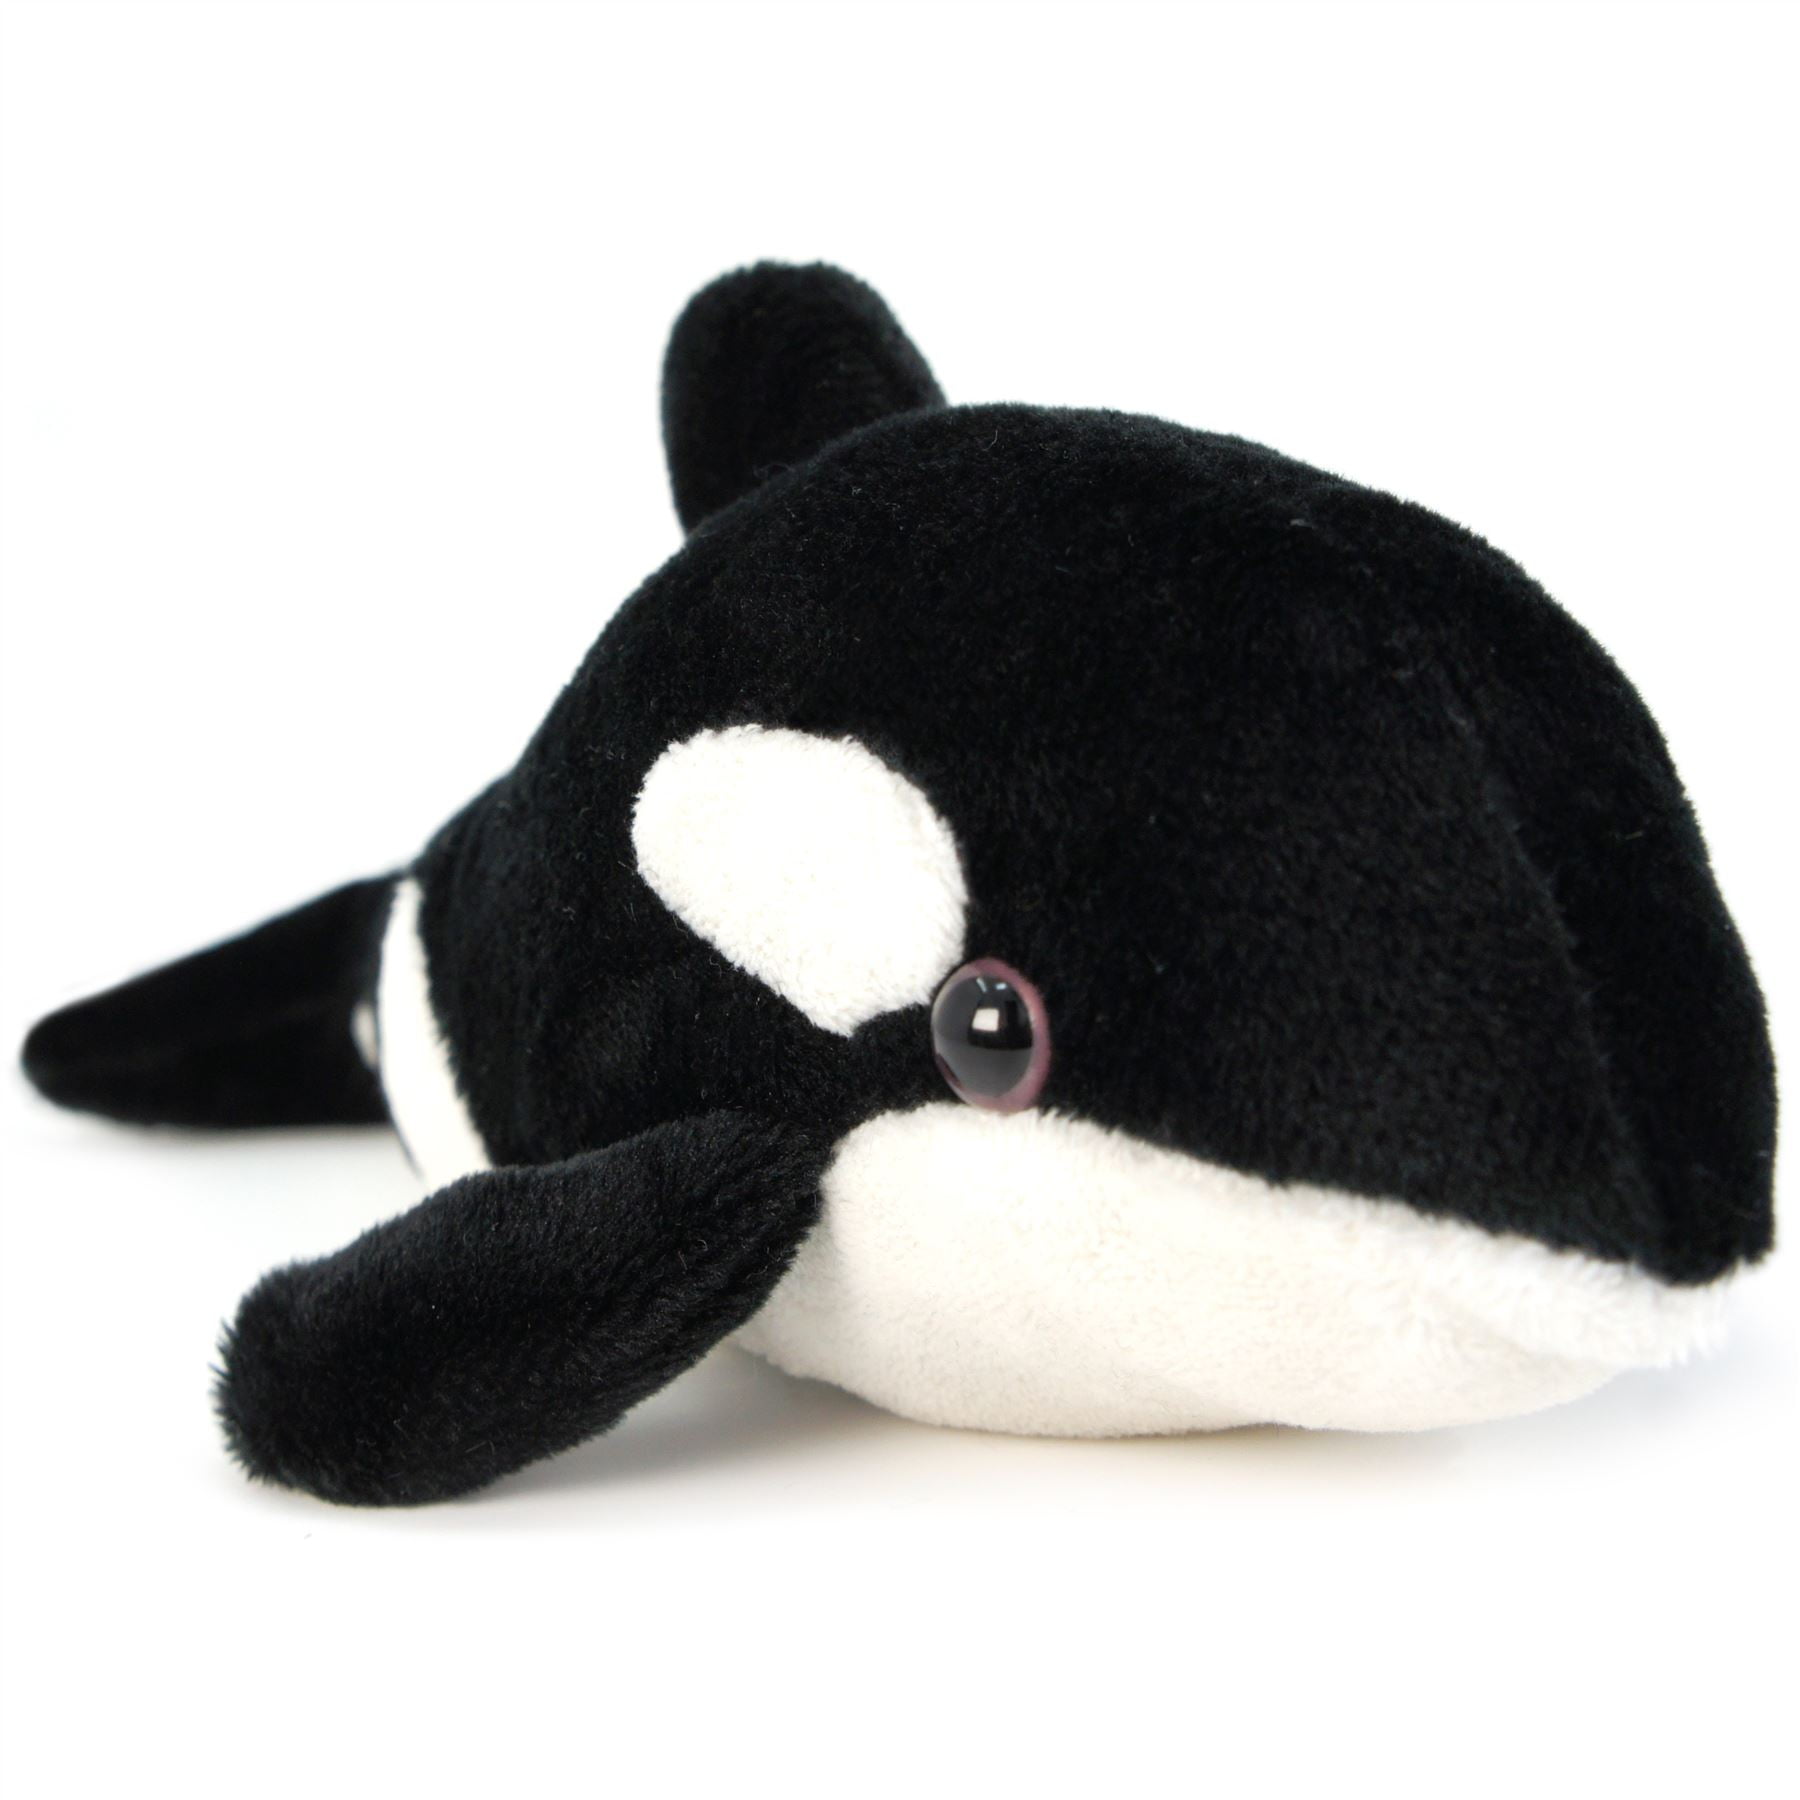 Cute Plush Toy Stuffed Animal Whale Toy Kids Dolls for Baby Care 